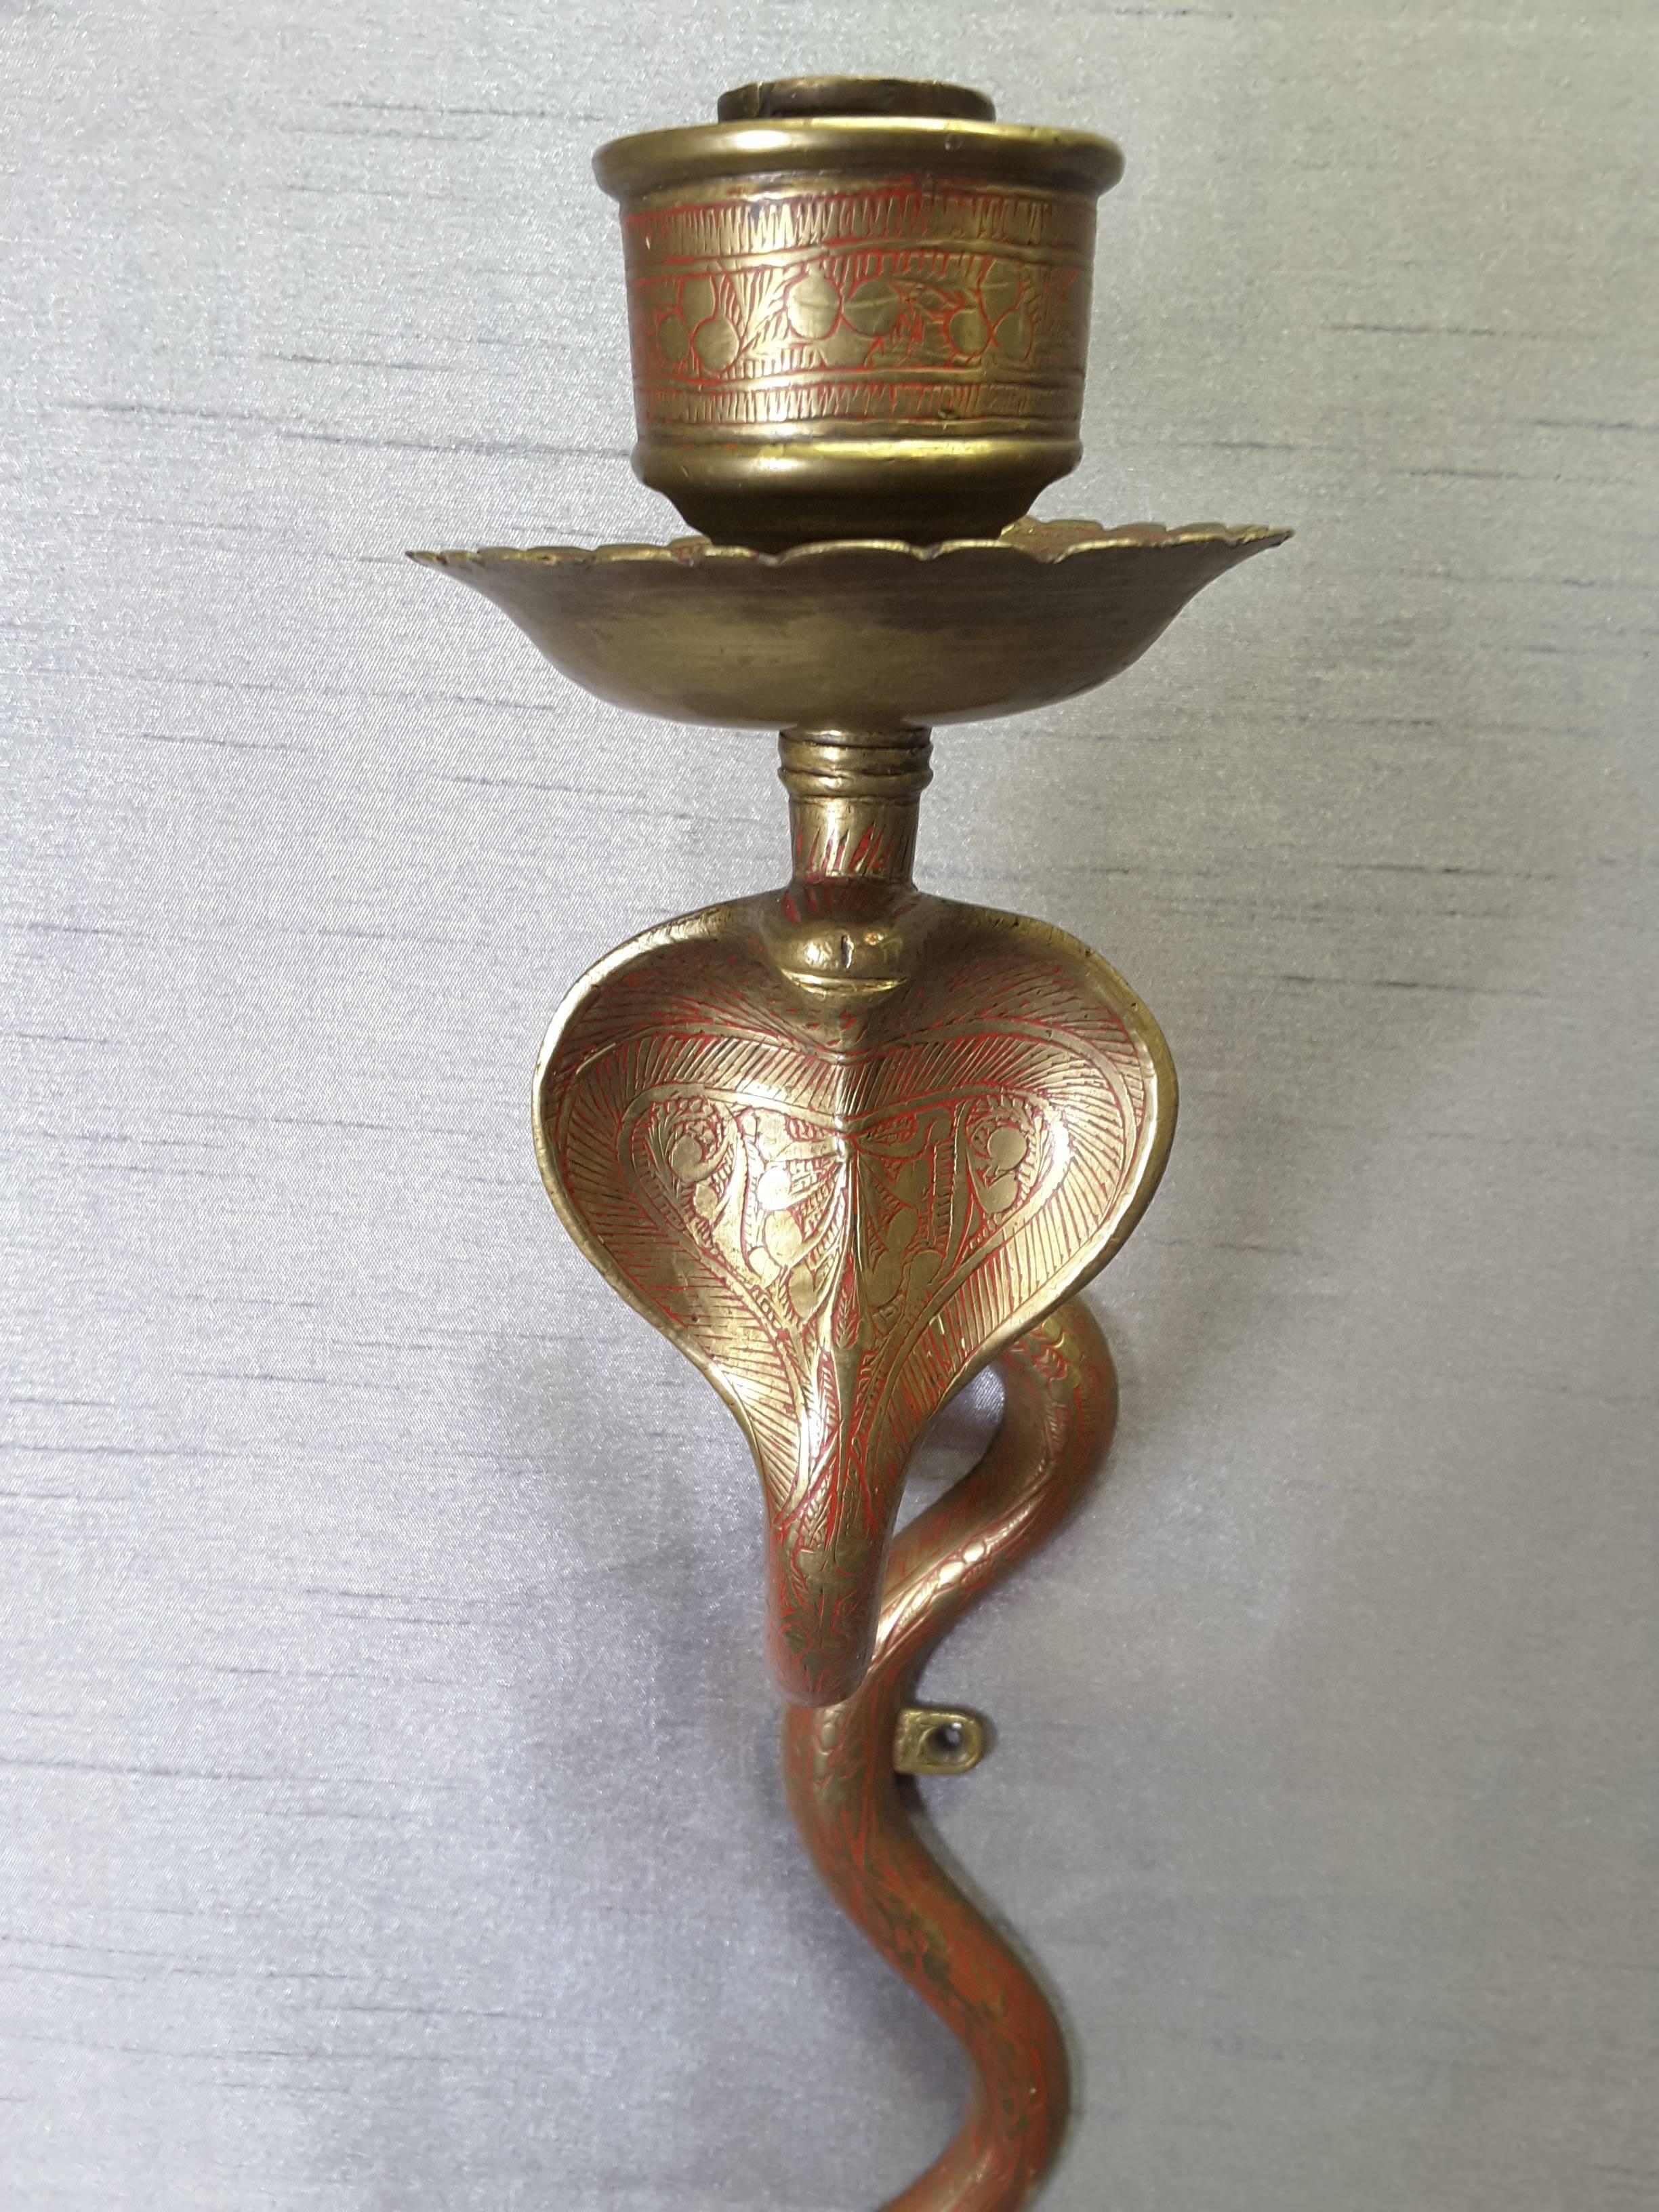 A Single Brass Cobra Sconce engraved decoration with red detailing, circa 1960s. The sconce has a single candle cup holder with drip cup, Open hooded cobra with S-shaped body, with two mounting brackets for screws. The sconce measures 20